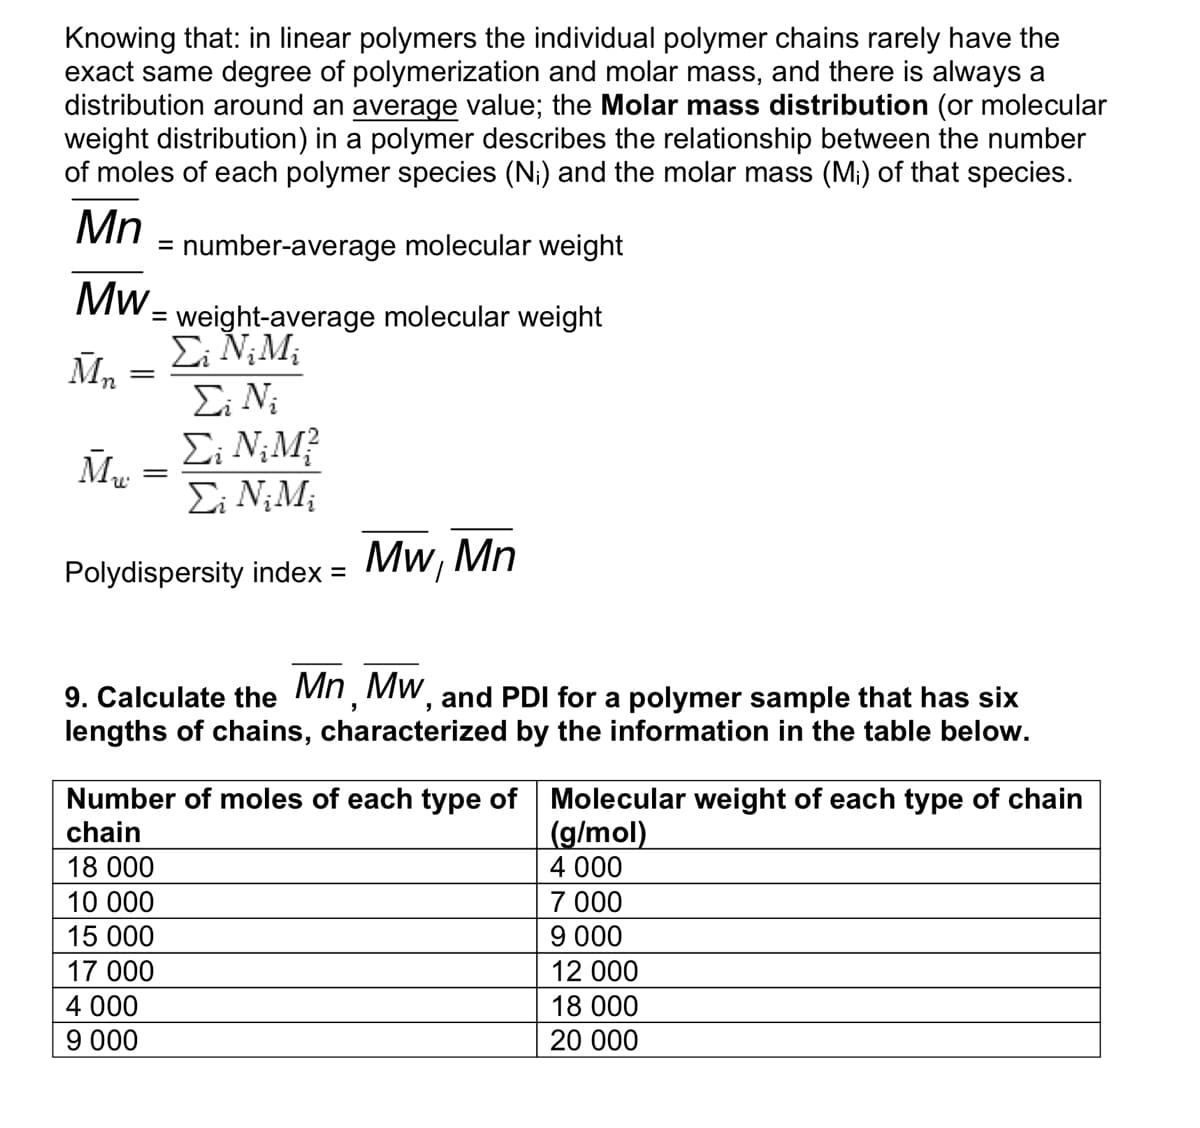 Knowing that: in linear polymers the individual polymer chains rarely have the
exact same degree of polymerization and molar mass, and there is always a
distribution around an average value; the Molar mass distribution (or molecular
weight distribution) in a polymer describes the relationship between the number
of moles of each polymer species (N₁) and the molar mass (M₁) of that species.
Mn
Mw
weight-average molecular weight
Σ; Ν;Μ;
Ei Ni
Σi N₂M²
Σ; Ν;Μ;
Polydispersity index = Mw, Mn
Mn
=
Mu
=
= number-average molecular weight
=
=
9. Calculate the Mn, MW, and PDI for a polymer sample that has six
lengths of chains, characterized by the information in the table below.
4 000
9 000
Number of moles of each type of
chain
18 000
10 000
15 000
17 000
Molecular weight of each type of chain
(g/mol)
4 000
7 000
9 000
12 000
18 000
20 000